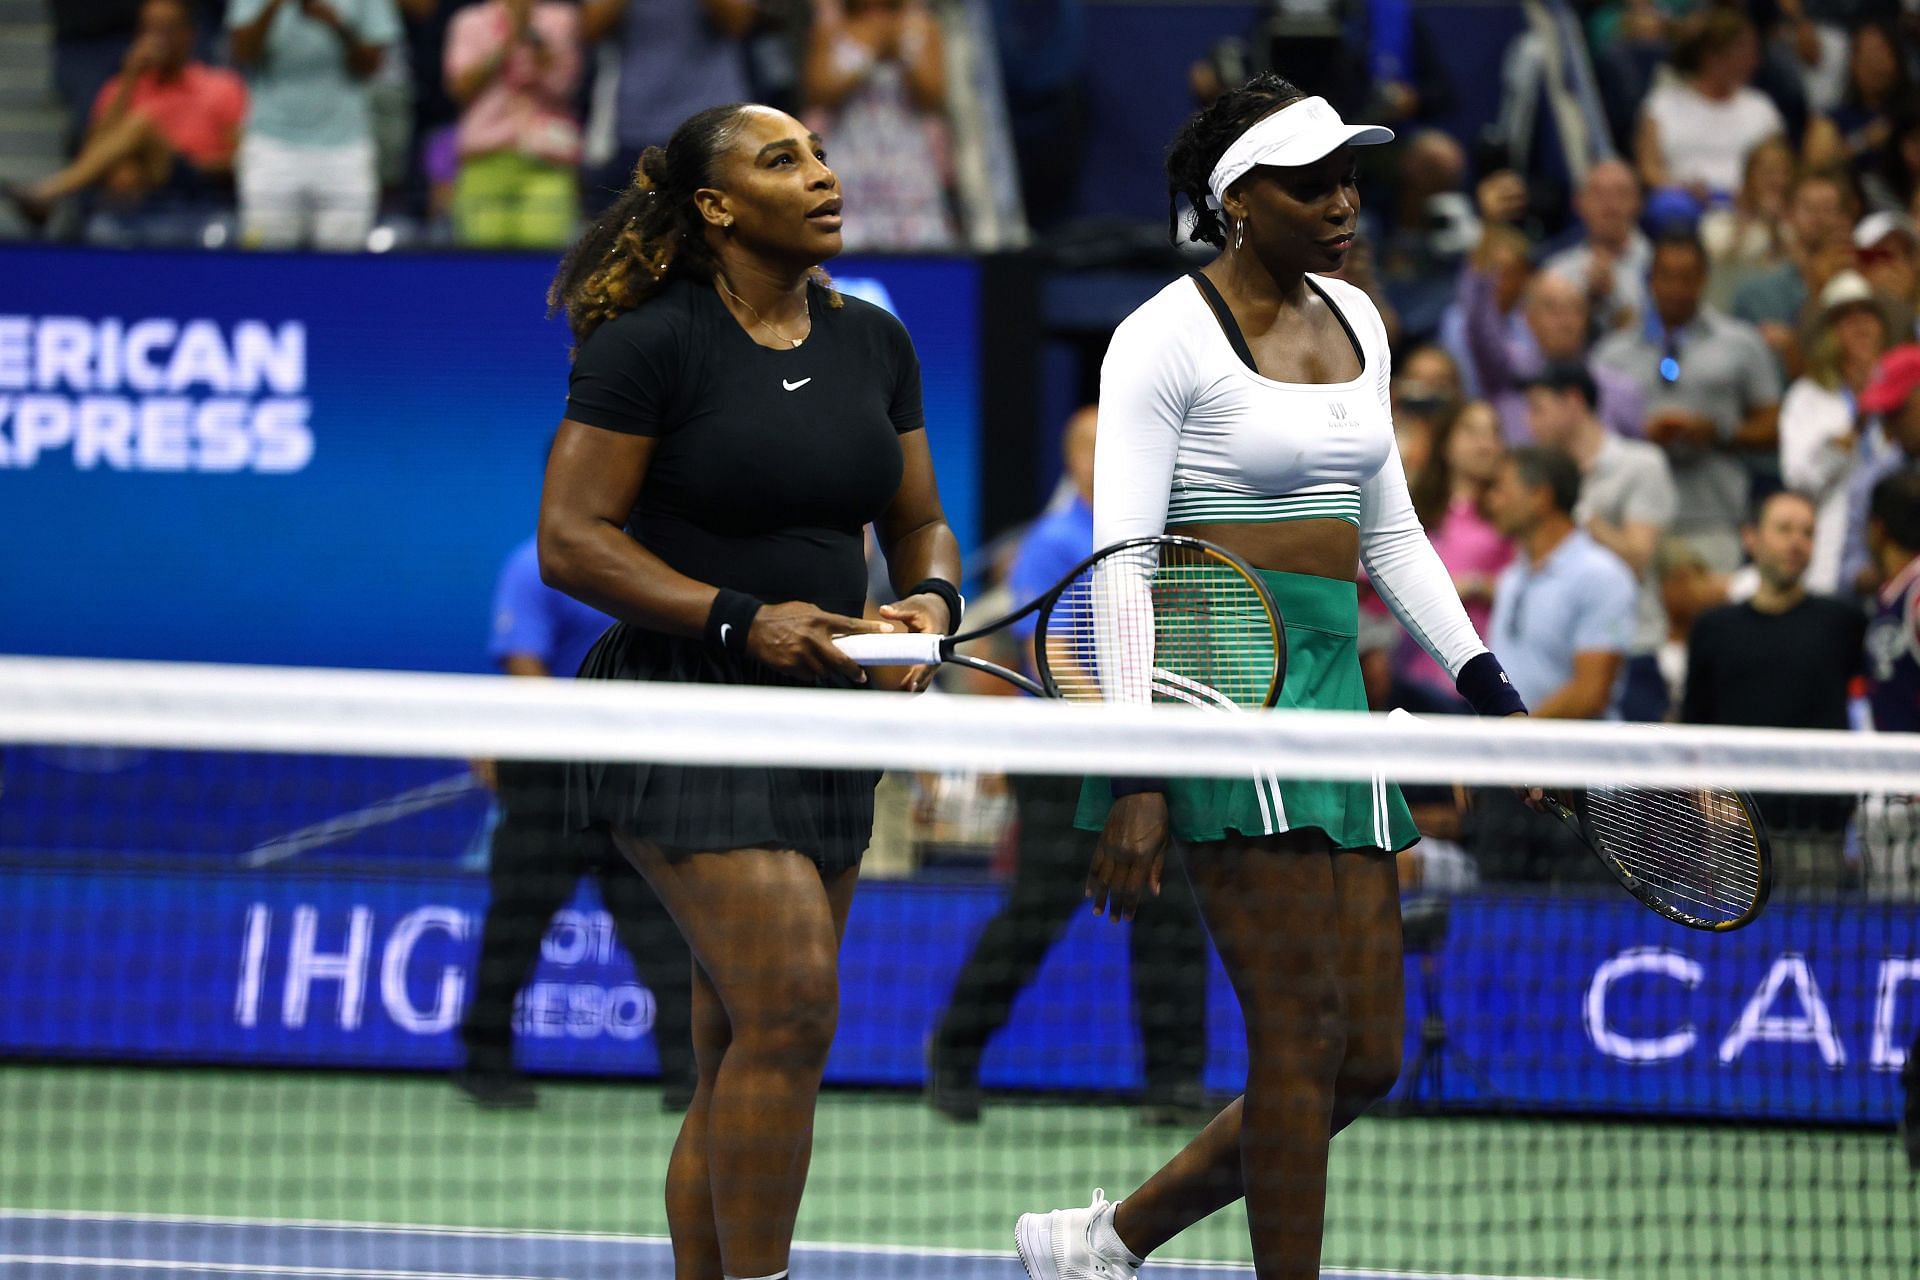 Serena Williams and Venus Williams react after being defeated by Lucie Hradecka and Linda Noskova at the 2022 US Open